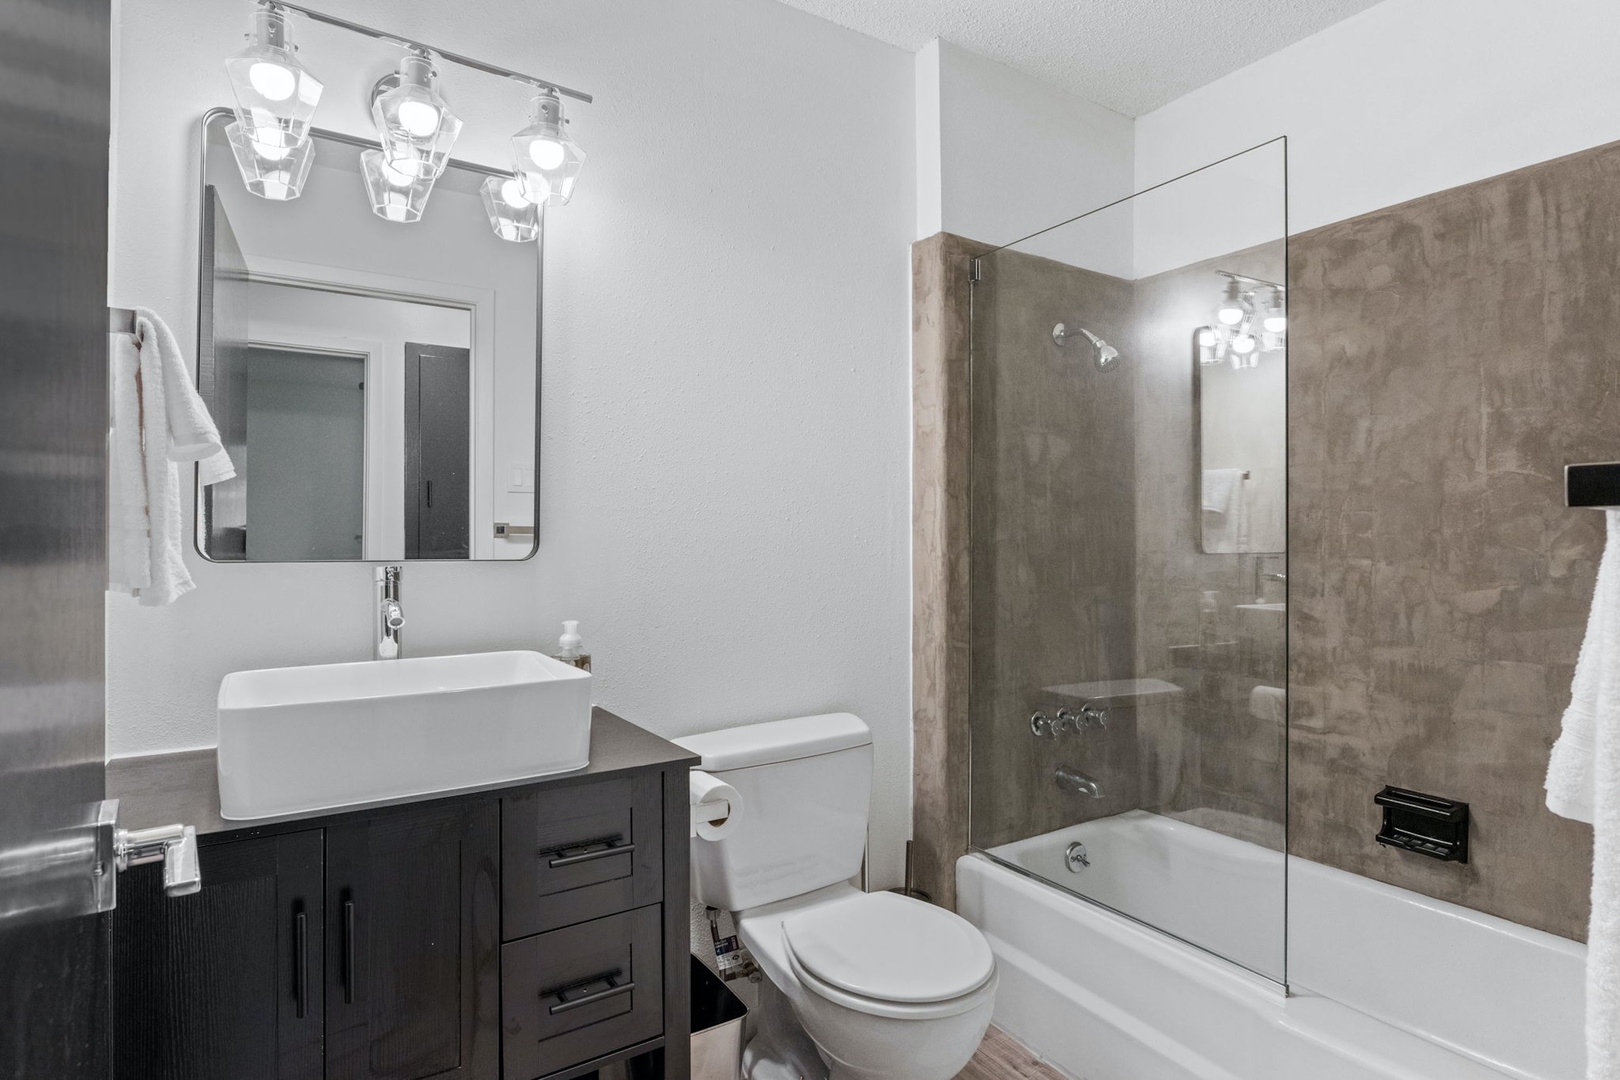 The second full bathroom offers a single vanity & shower/tub combo